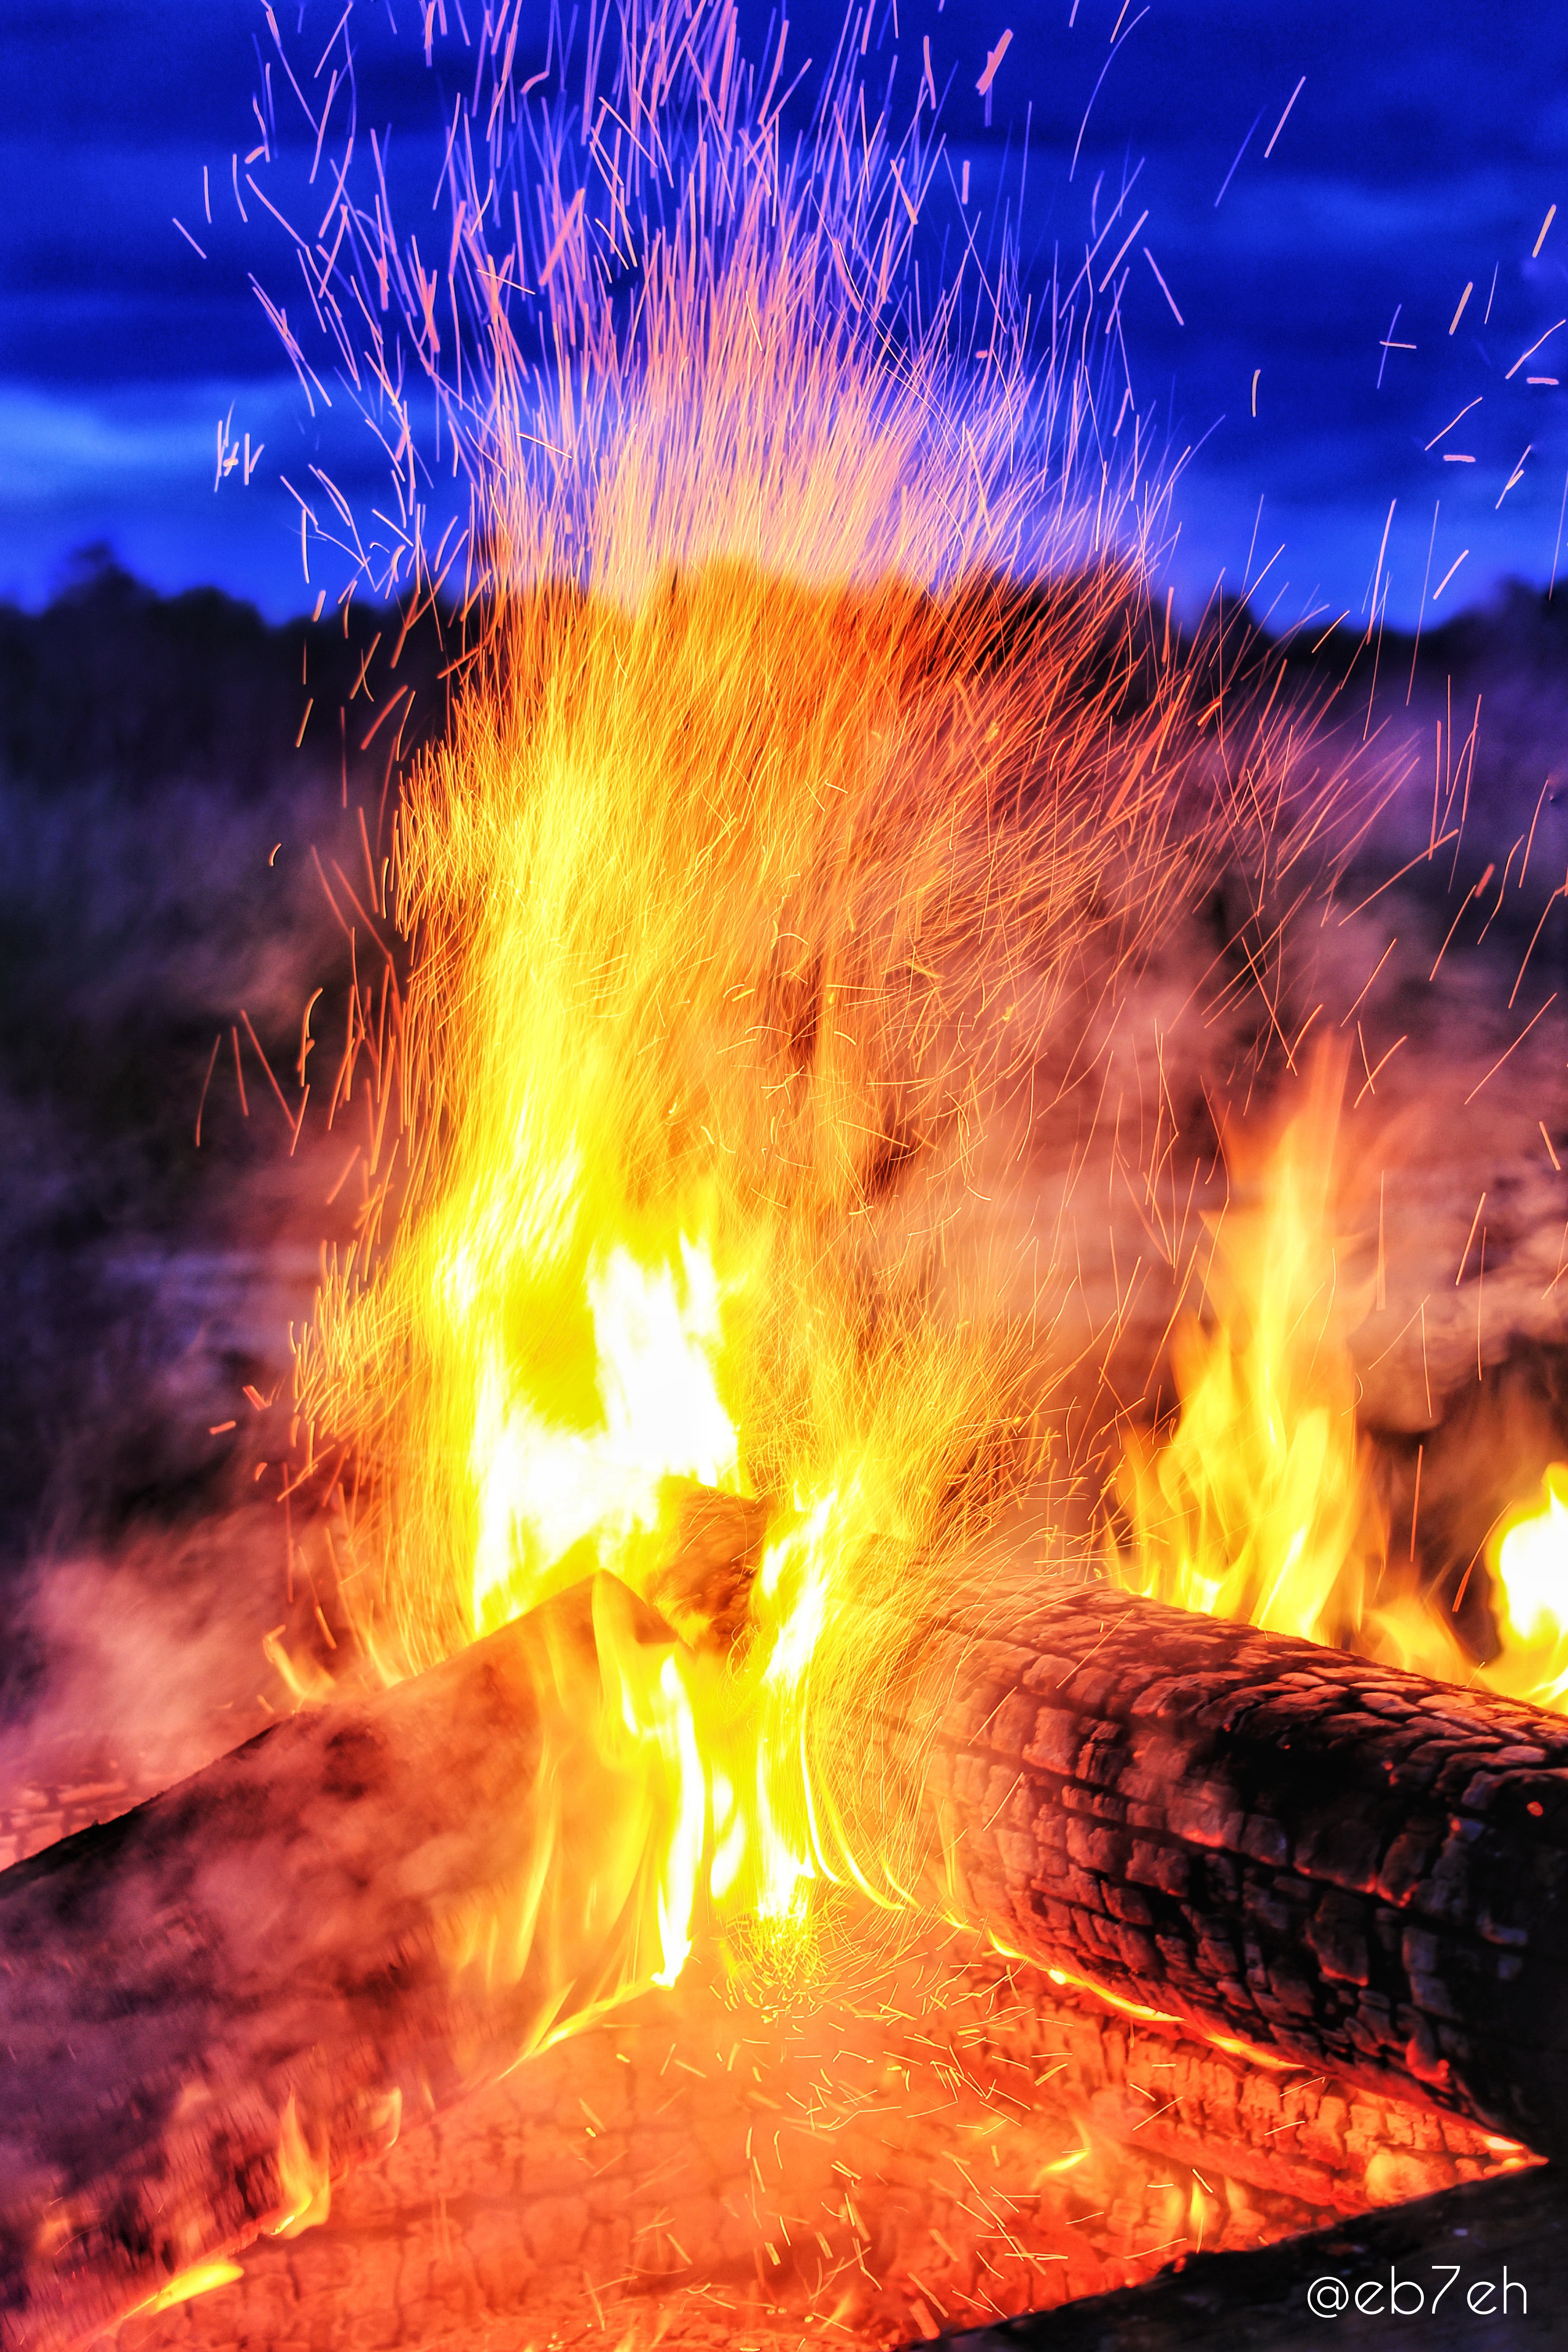 Bonfires Sparks Night Landscape Wood Forest Eb7eh Abstract 3425x5137